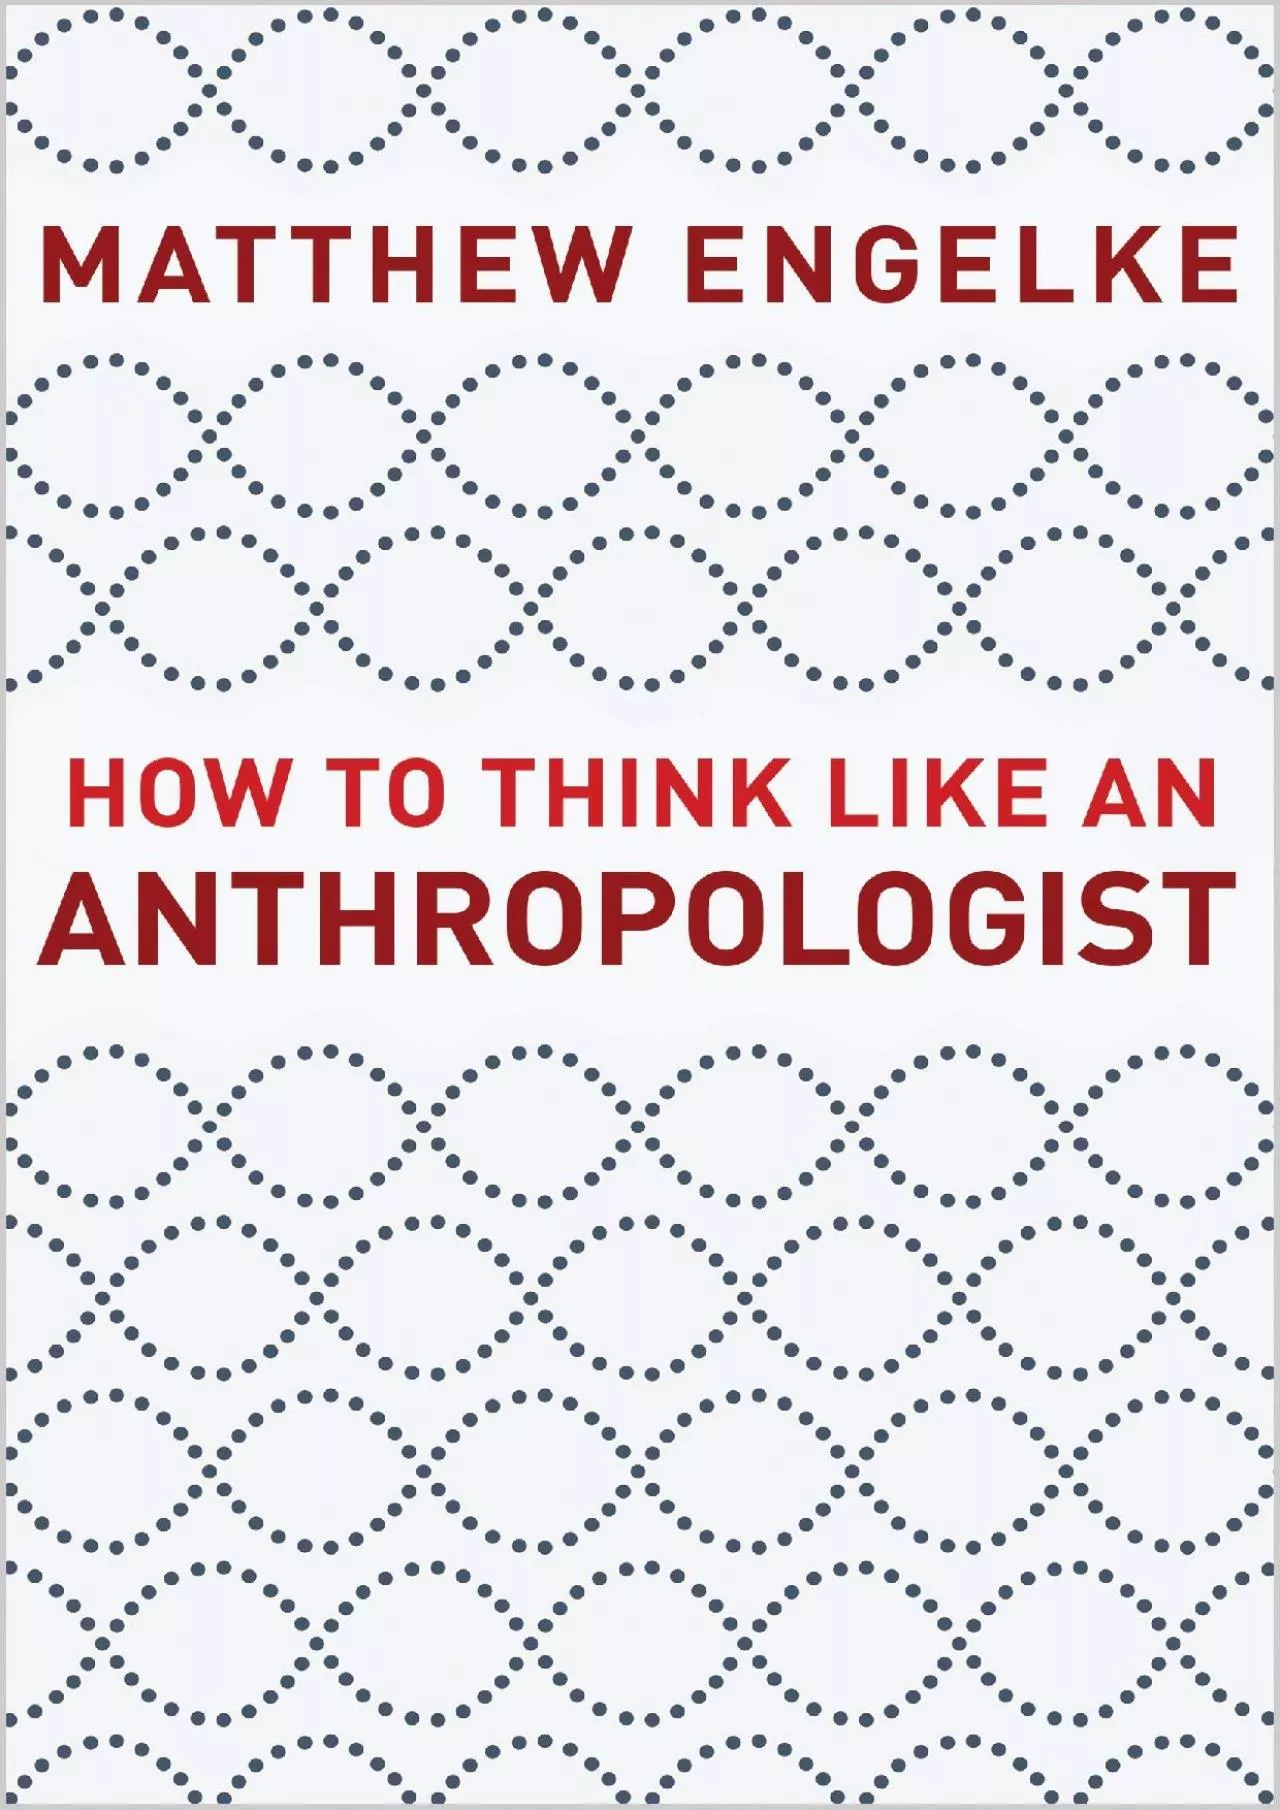 (DOWNLOAD)-How to Think Like an Anthropologist